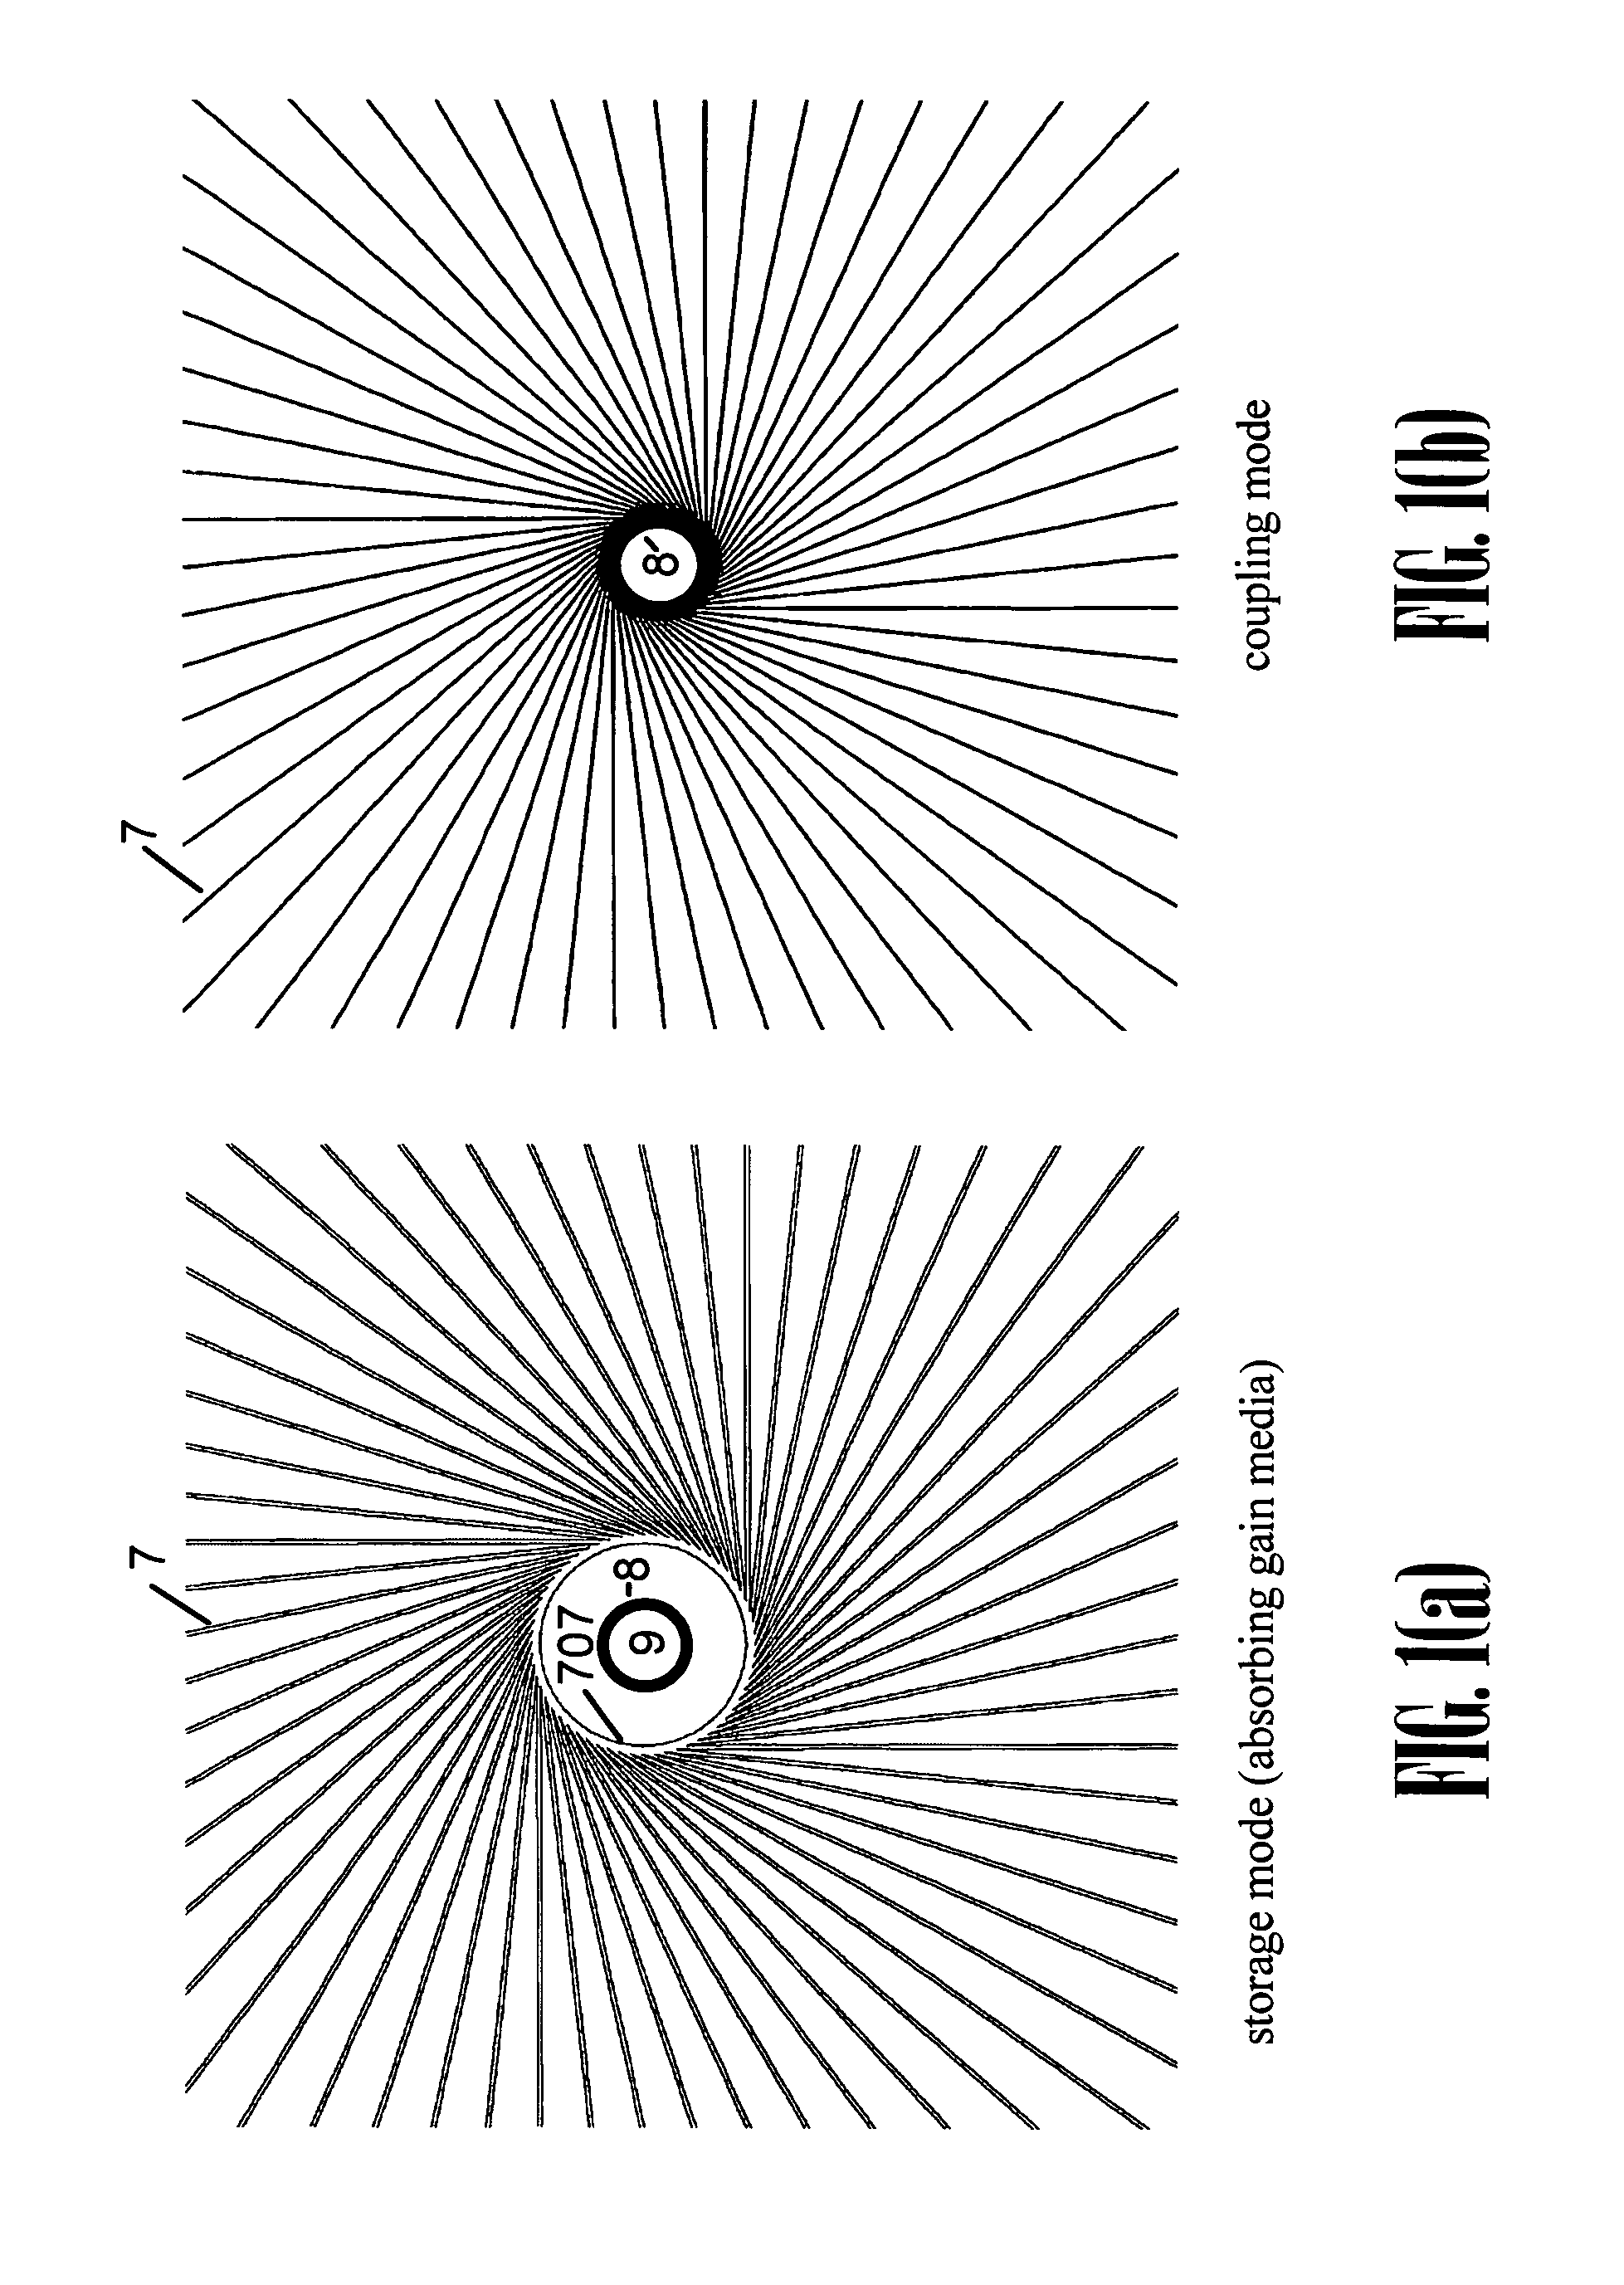 Circular optical cavity electronically switched between at least two distinct cavity modes